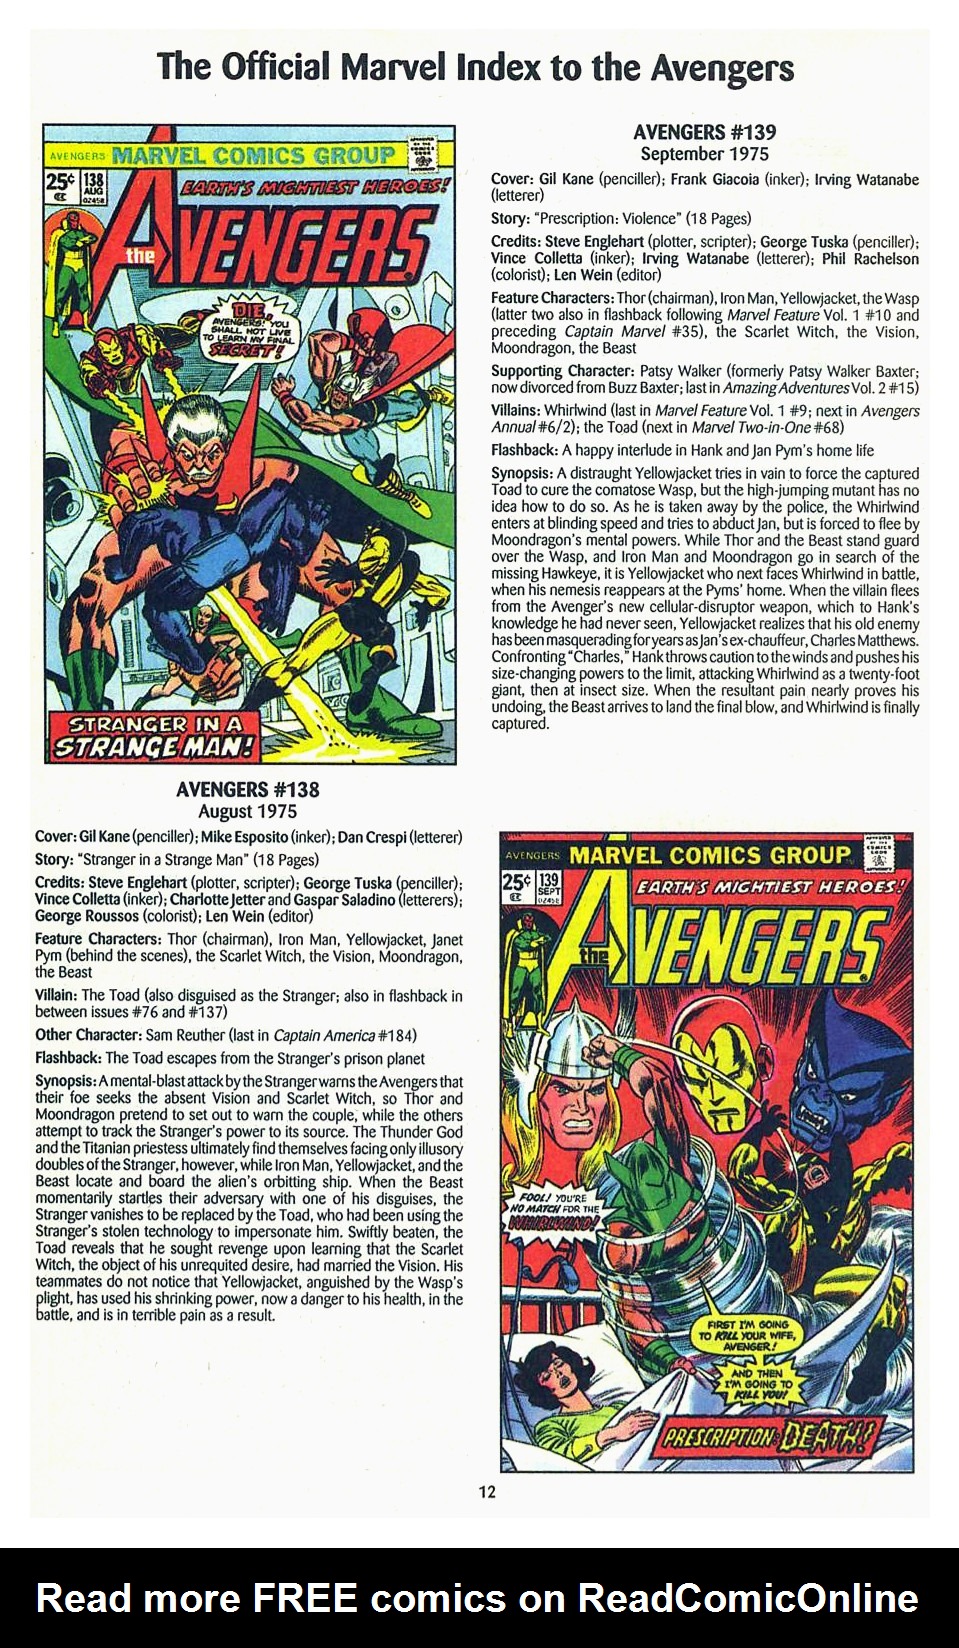 Read online The Official Marvel Index to the Avengers comic -  Issue #3 - 14